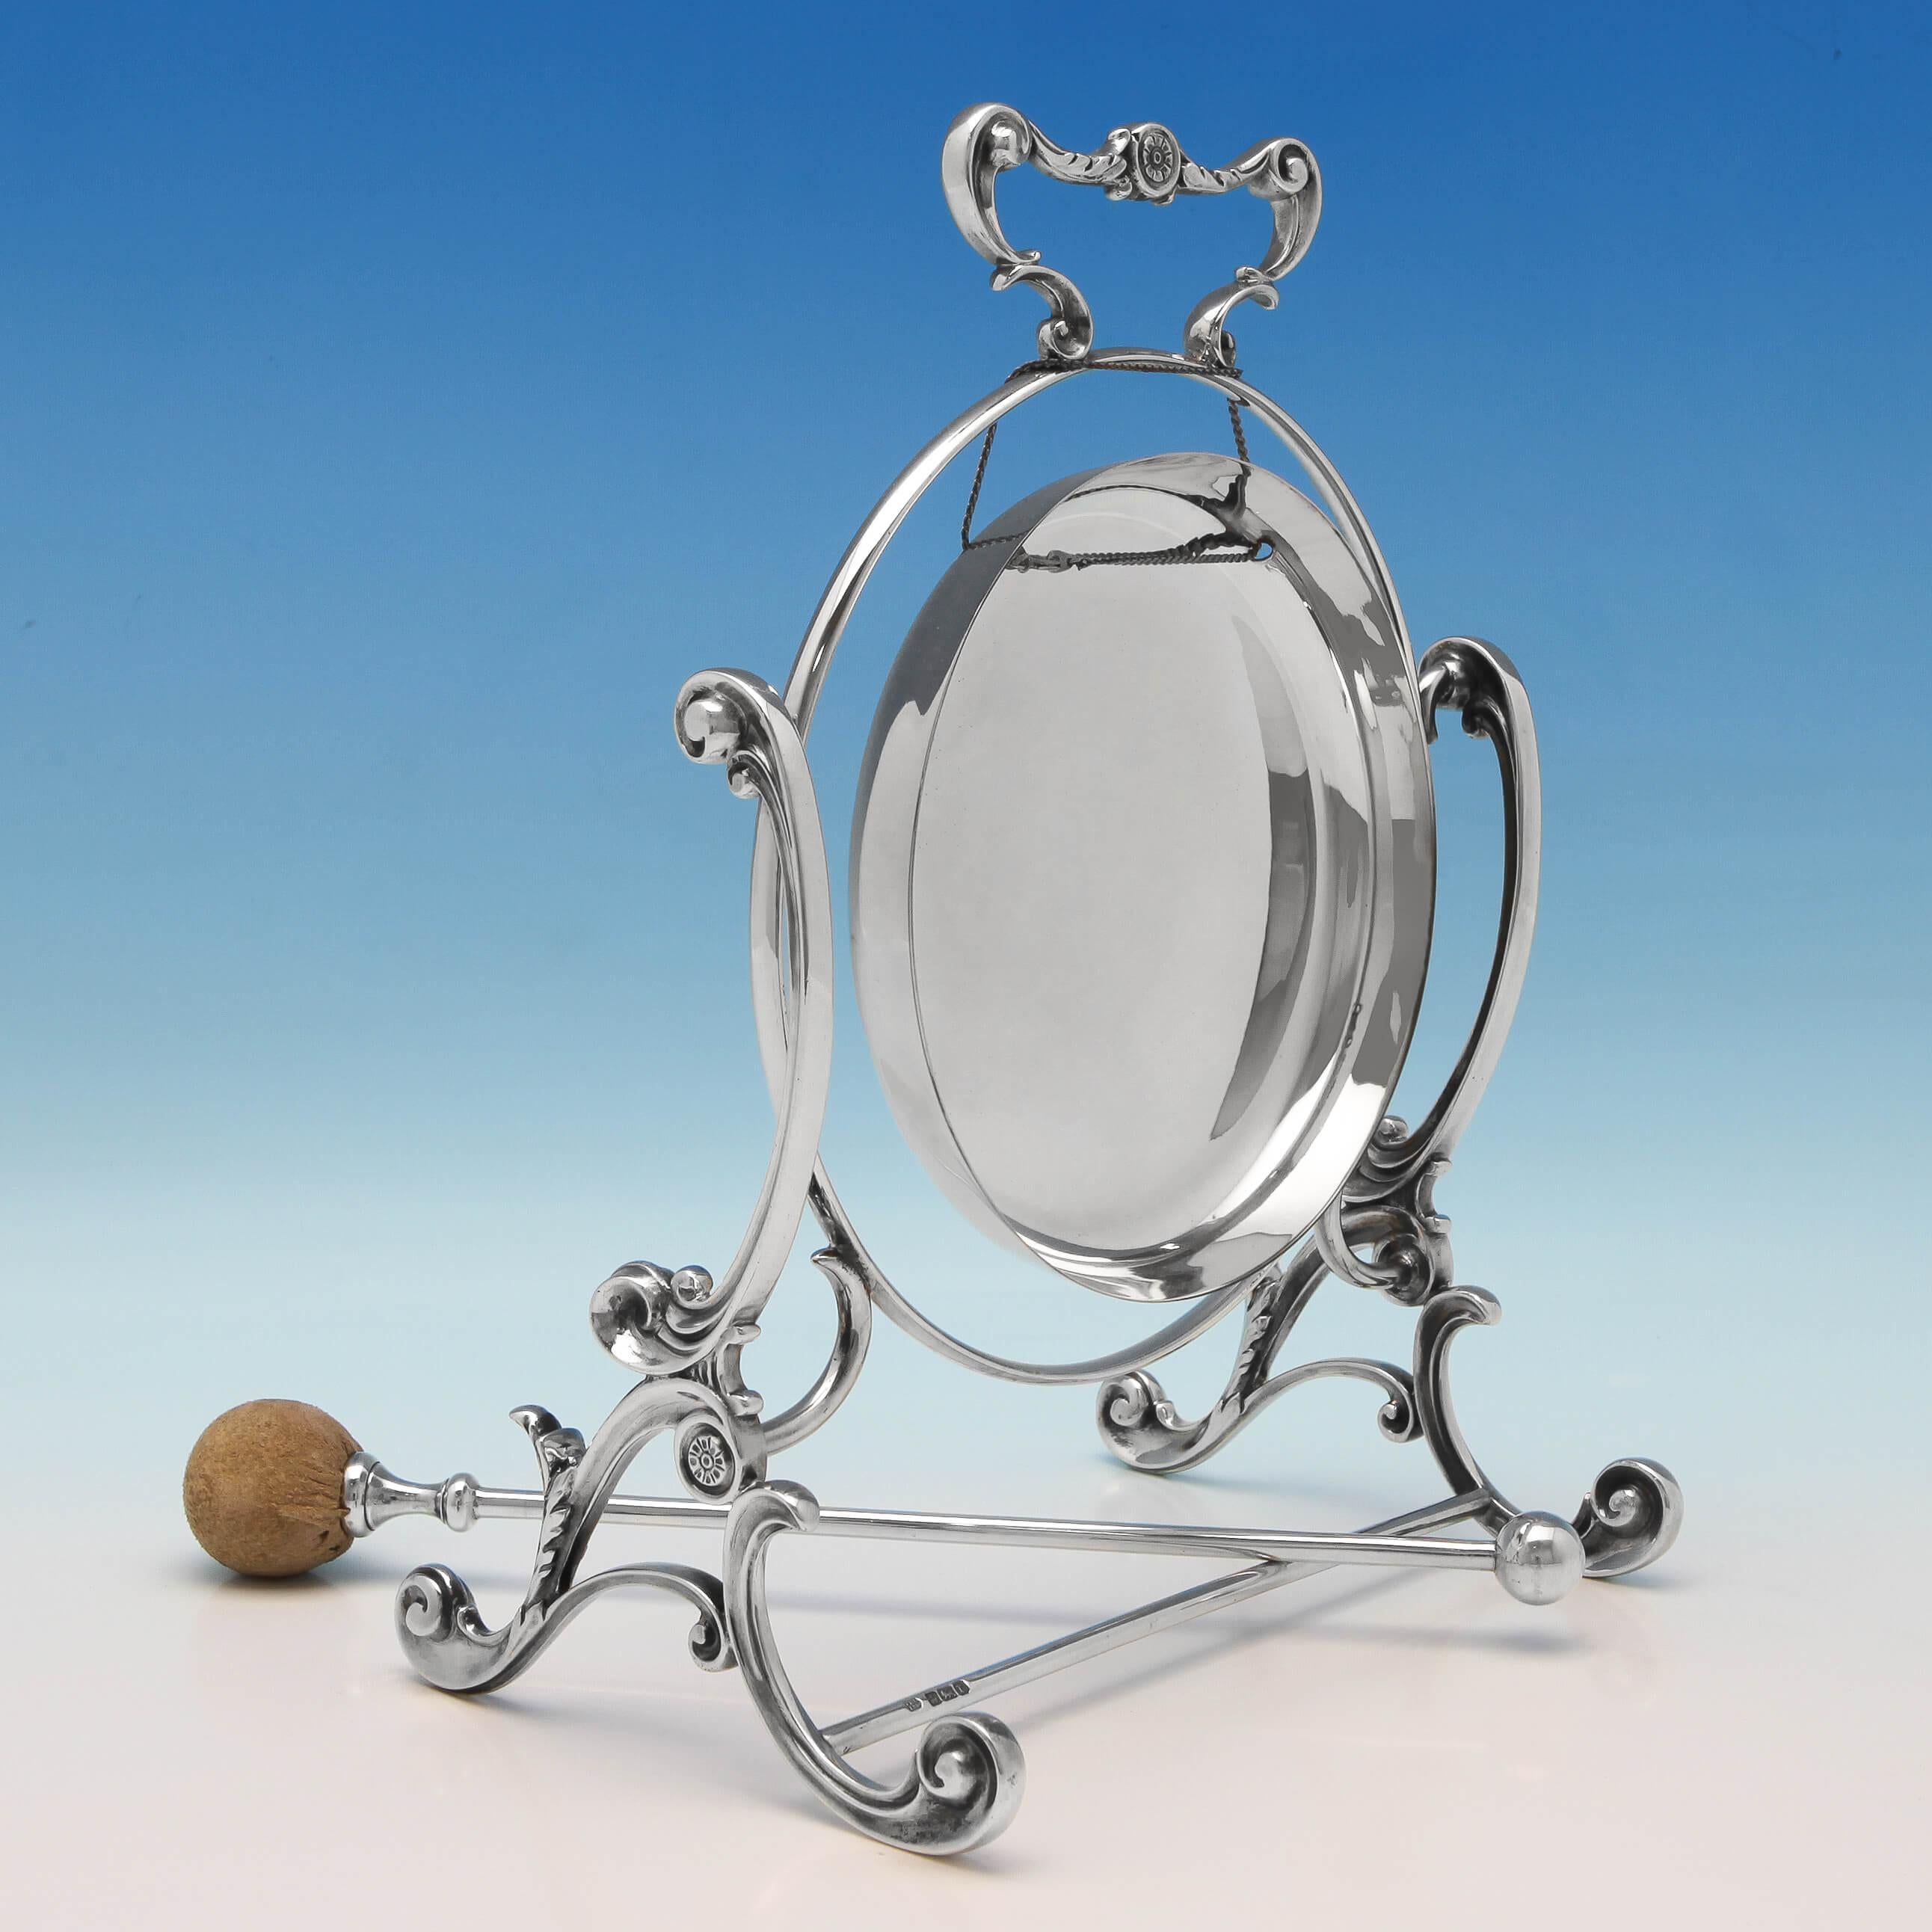 Hallmarked in Sheffield in 1909 by Fenton Brothers Ltd., this stylish and rare, Edwardian, Antique, Sterling Silver Gong stands on a scroll detailed frame and has a beater with chamois leather cover. The gong measures 10